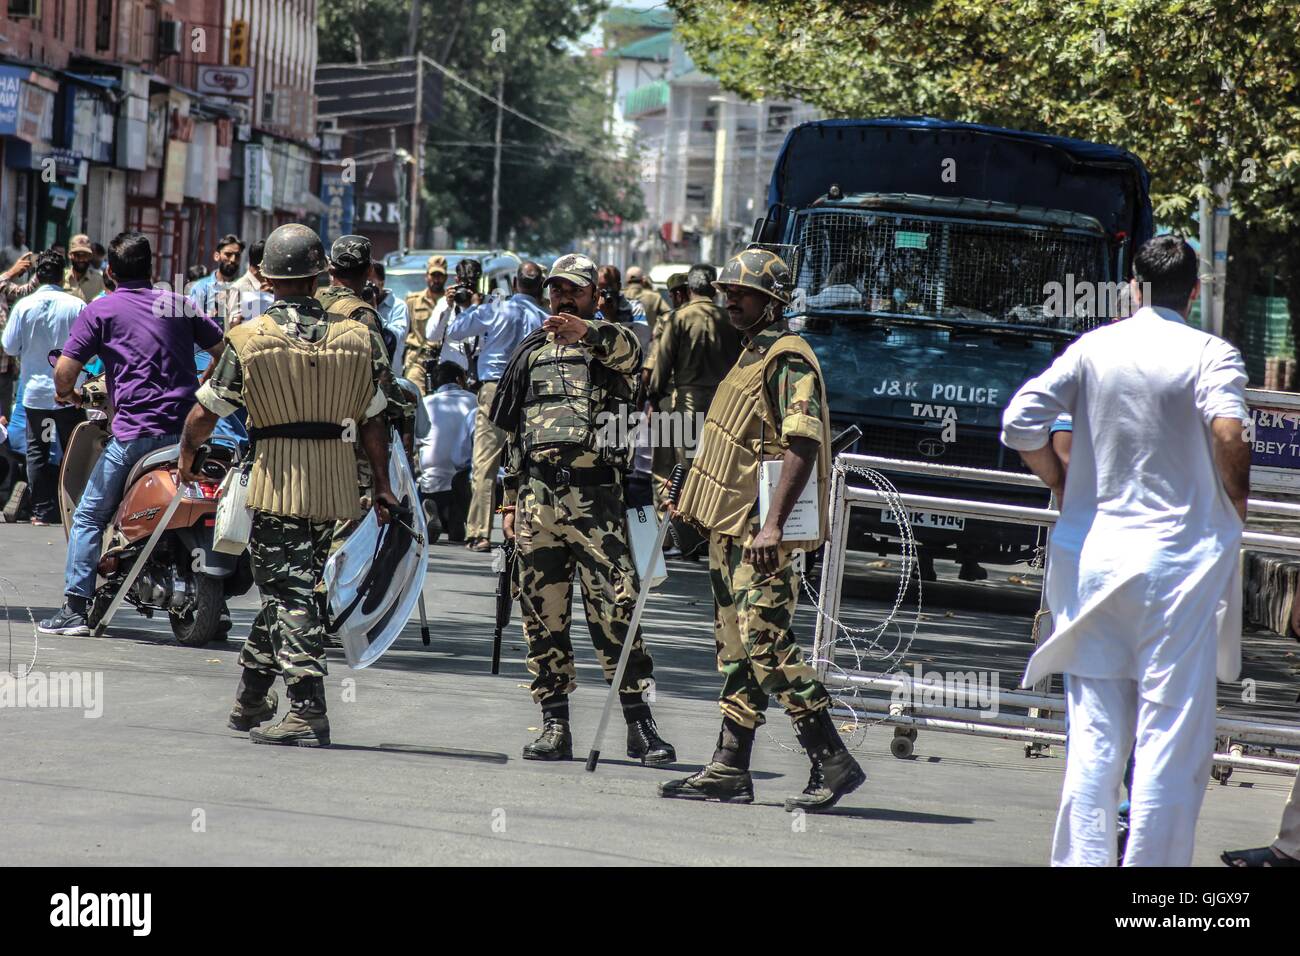 Srinagar, Kashmir. 16th August, 2016. Indian forces in Indian-controed Kashmir shot and killed six civilians and injured at least 30 others Tuesday as clashes intensified with anti-India protesters in the troubled region, police said.  The troops fired live ammunition, shotgun pellets and tear gas to control a crowd of hundreds throwing stones and chanting slogans in Aripanthan village, west of the area's main city Srinagar, said a police official who spoke on condition of anonymity because of department policy. Credit:  ajaz bhat/Alamy Live News Stock Photo